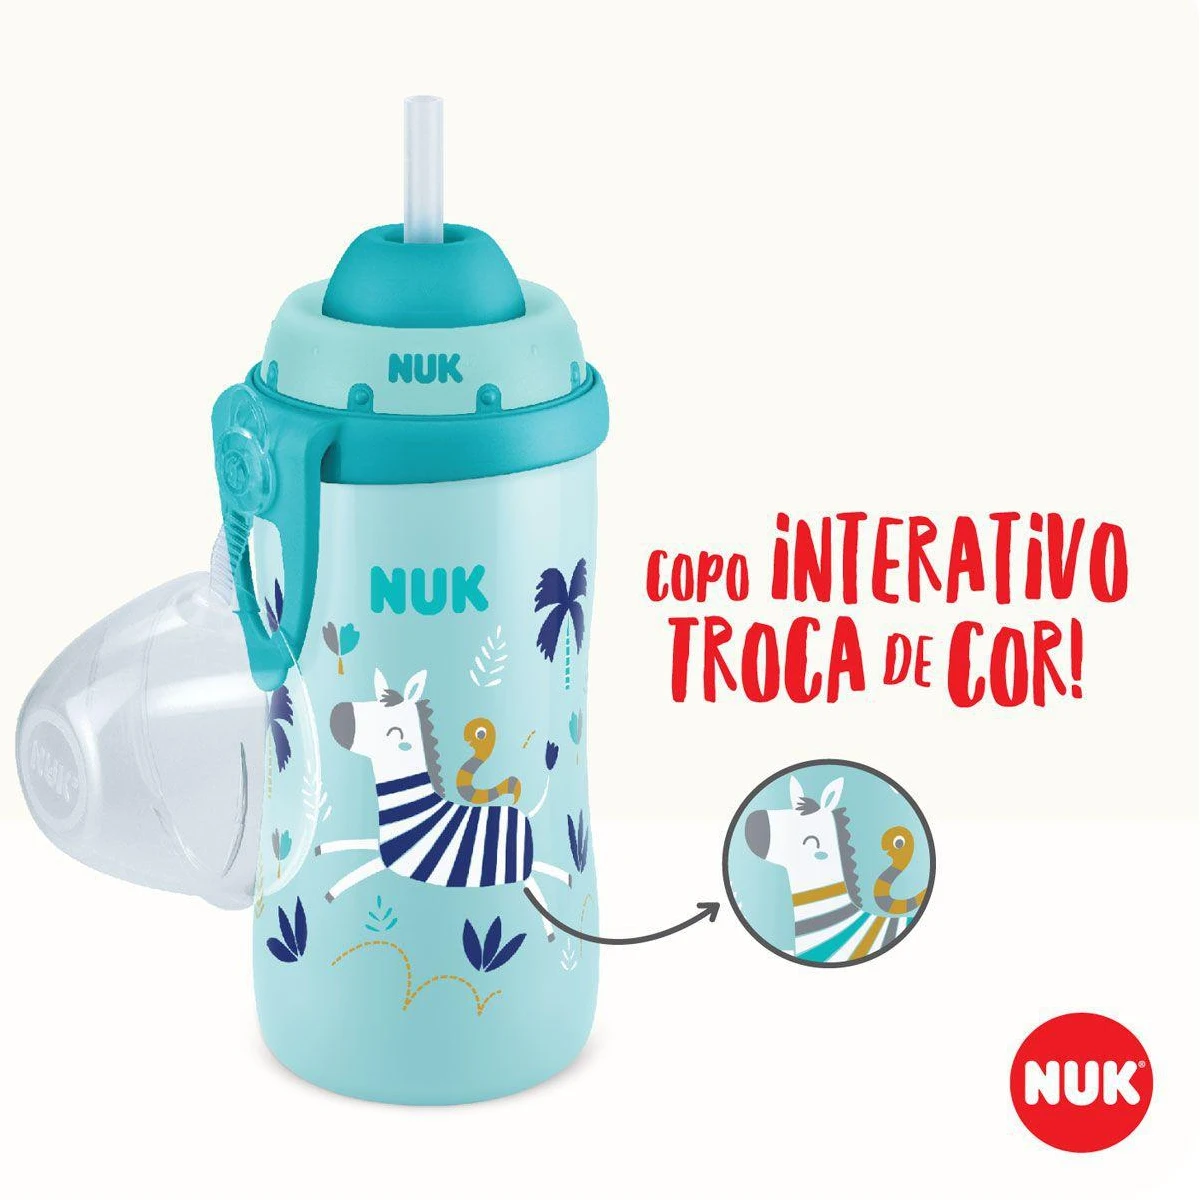 NUK Flexi Cup 300ml with straw